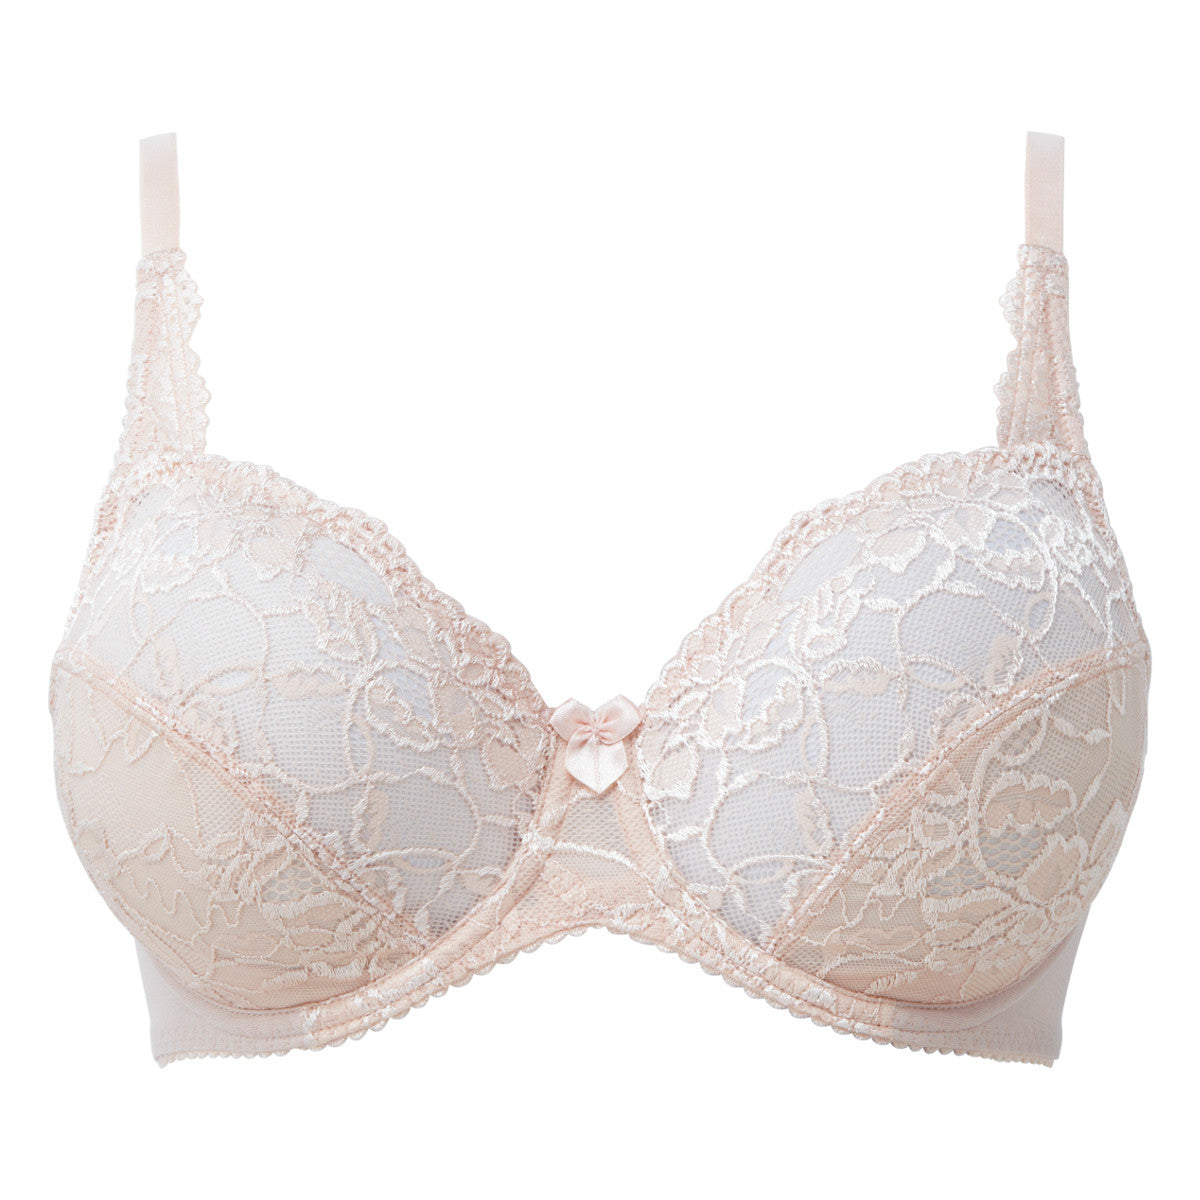 CHARNOS ROSALIND FULL Cup Bra 116501 Underwired Womens Lace Bras $17.72 -  PicClick